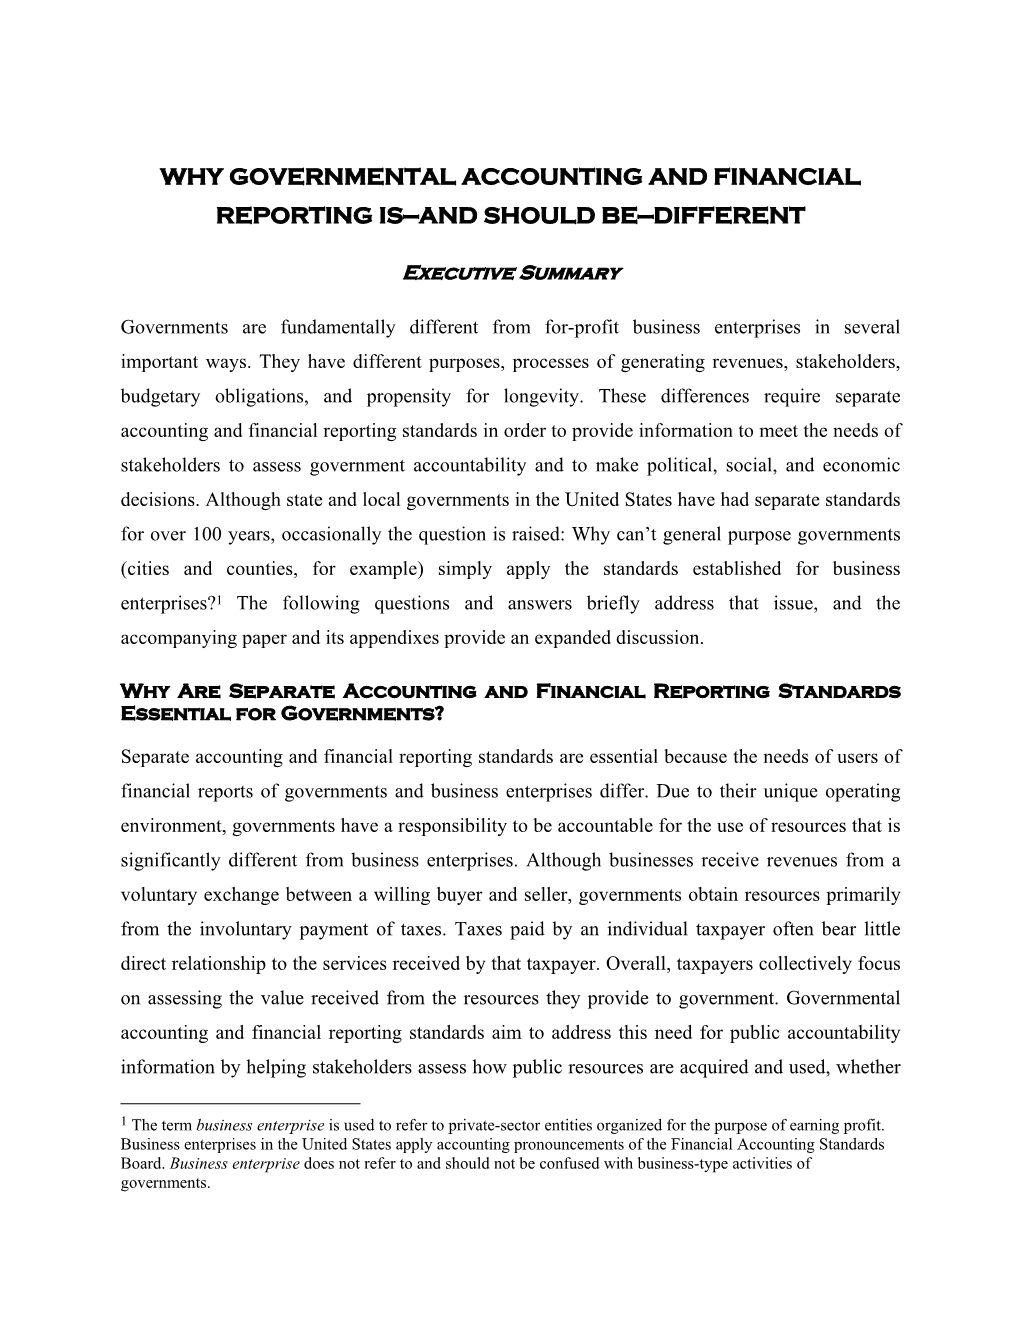 Why Governmental Accounting and Financial Reporting Is--And Should Be-Different